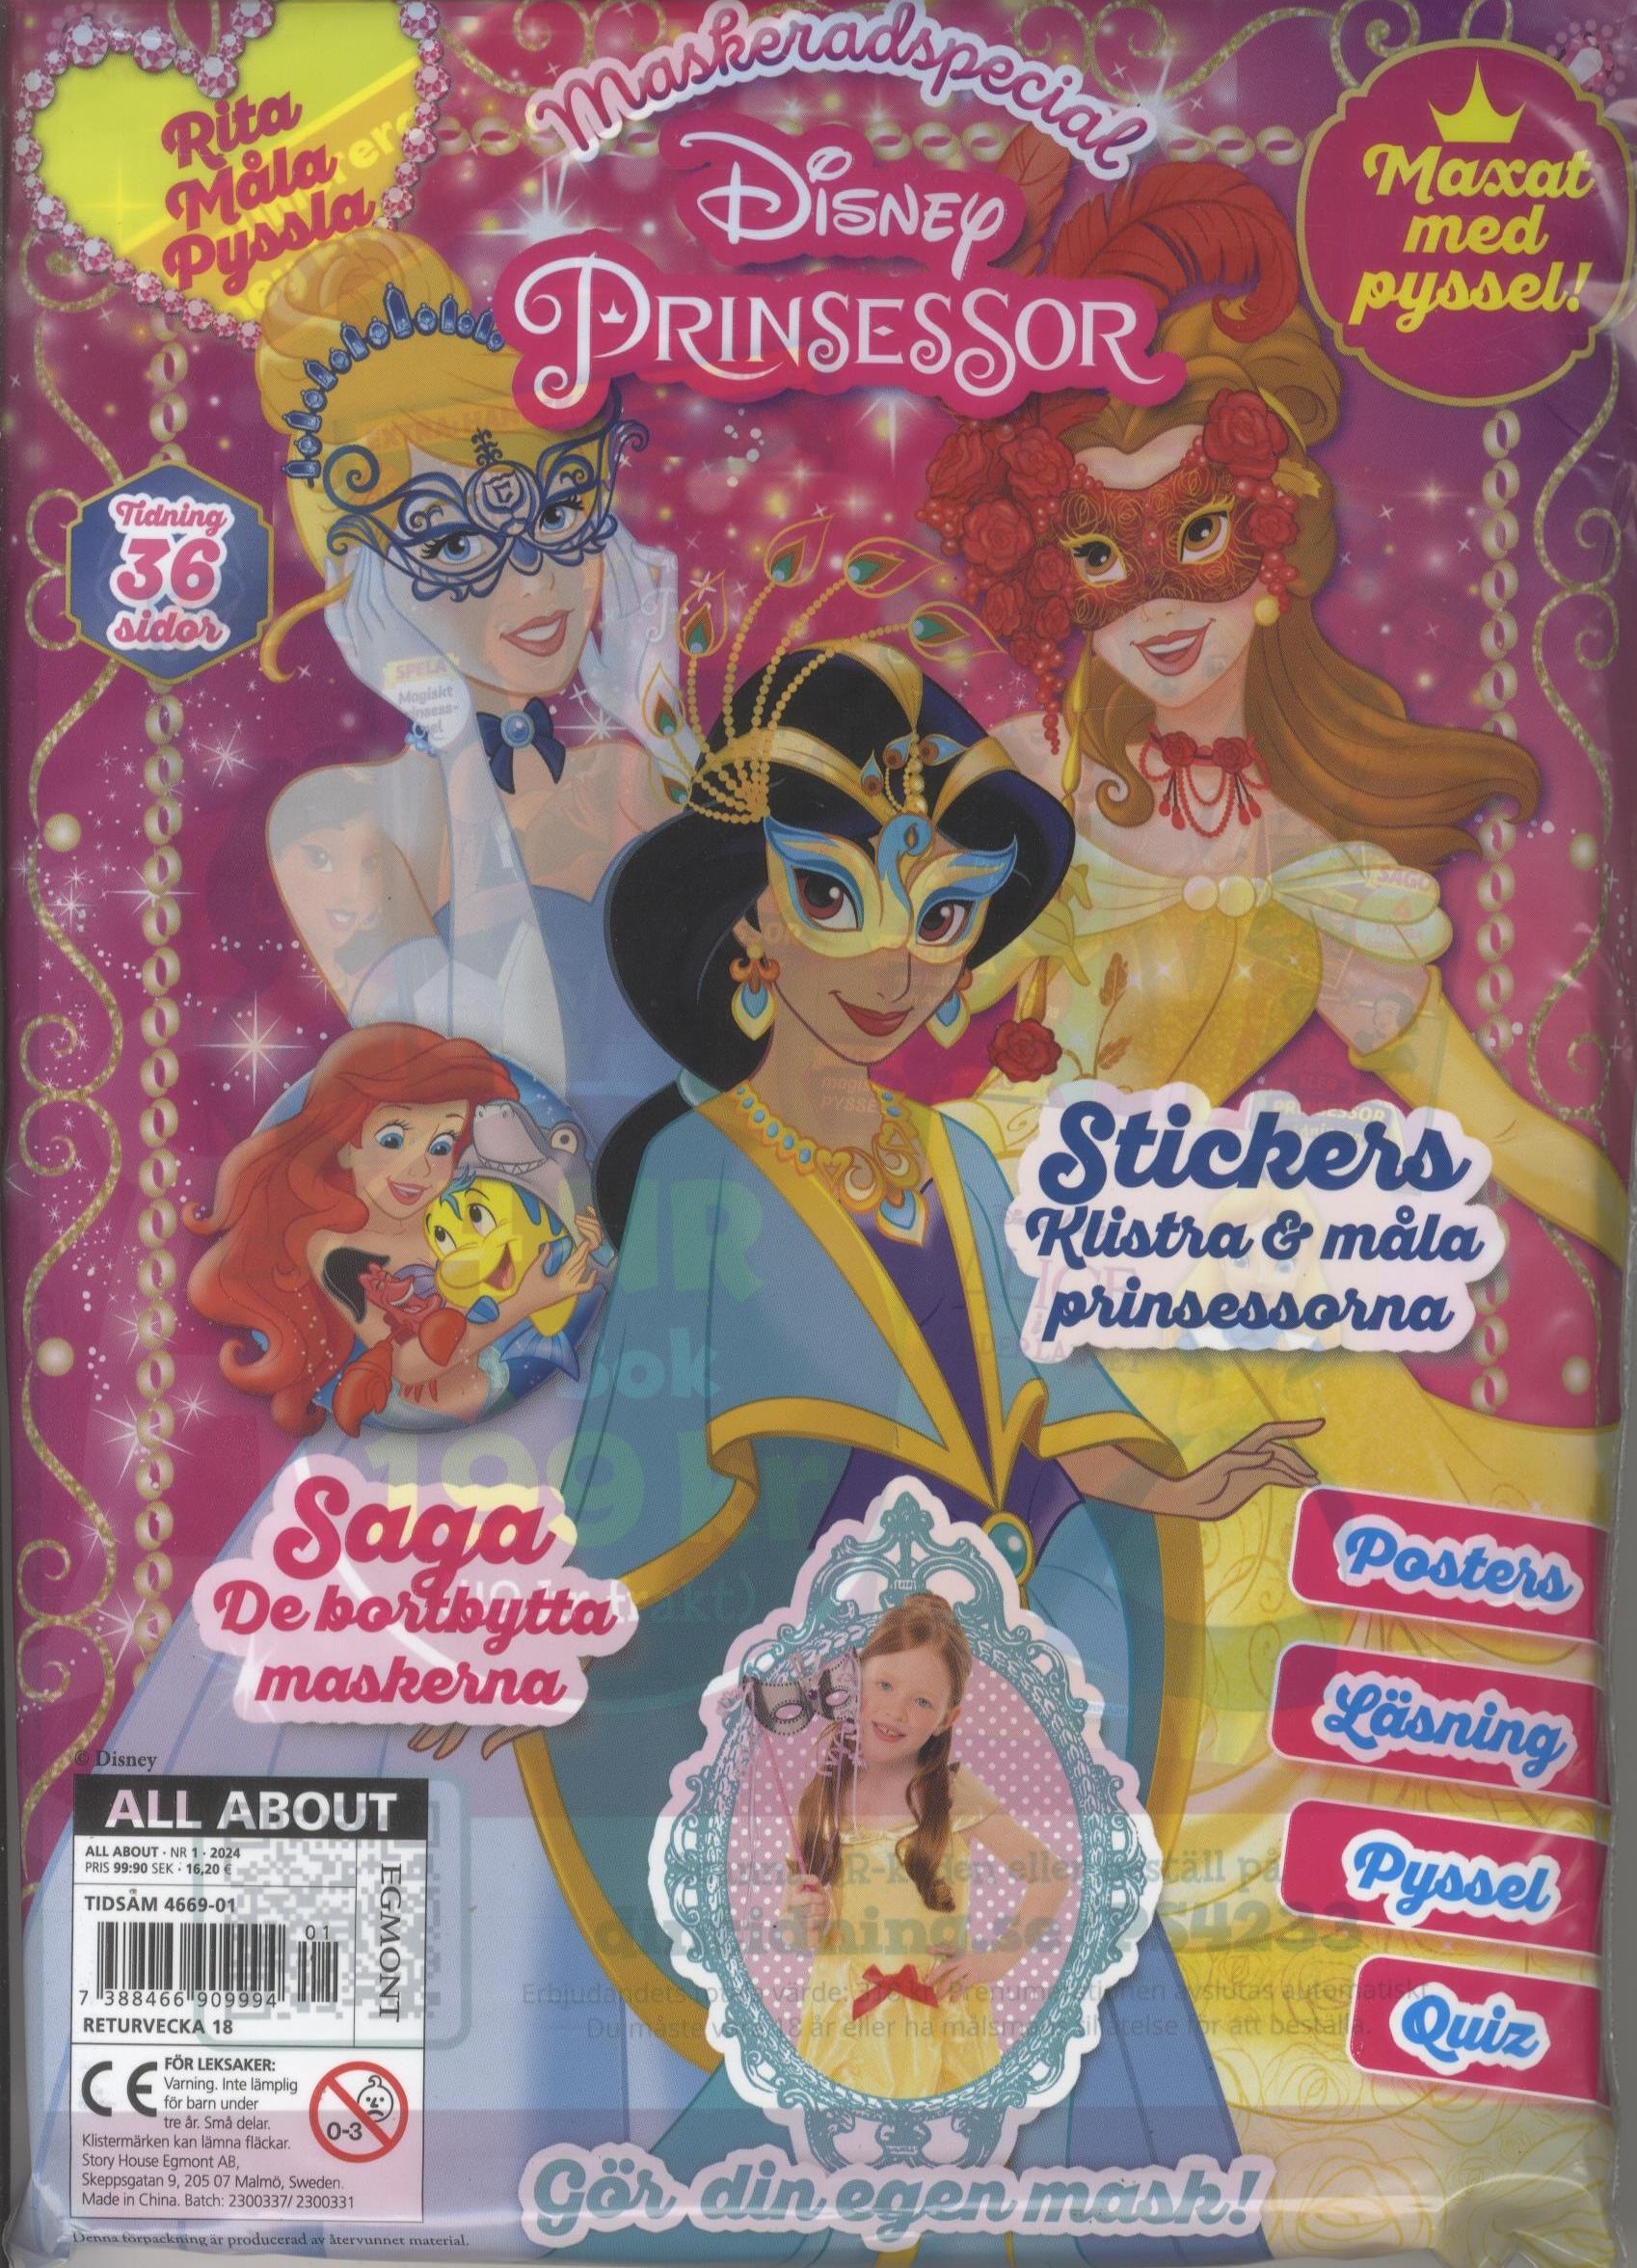 All About Prinsessor